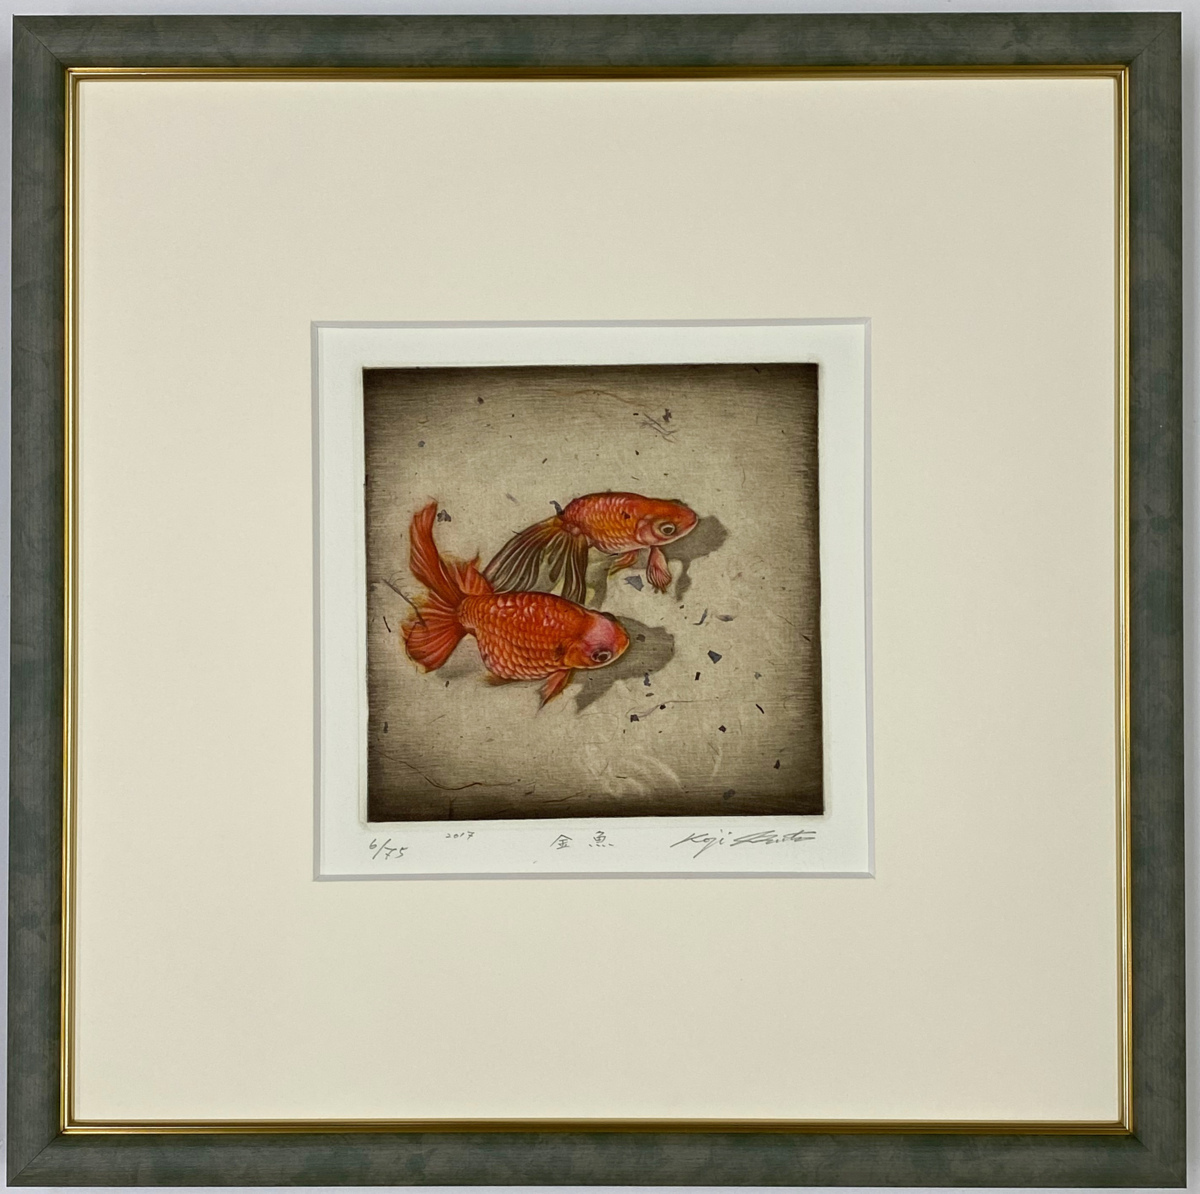  raw rice field ..[ goldfish ] copperplate engraving color mezzo chin to frame fish ....